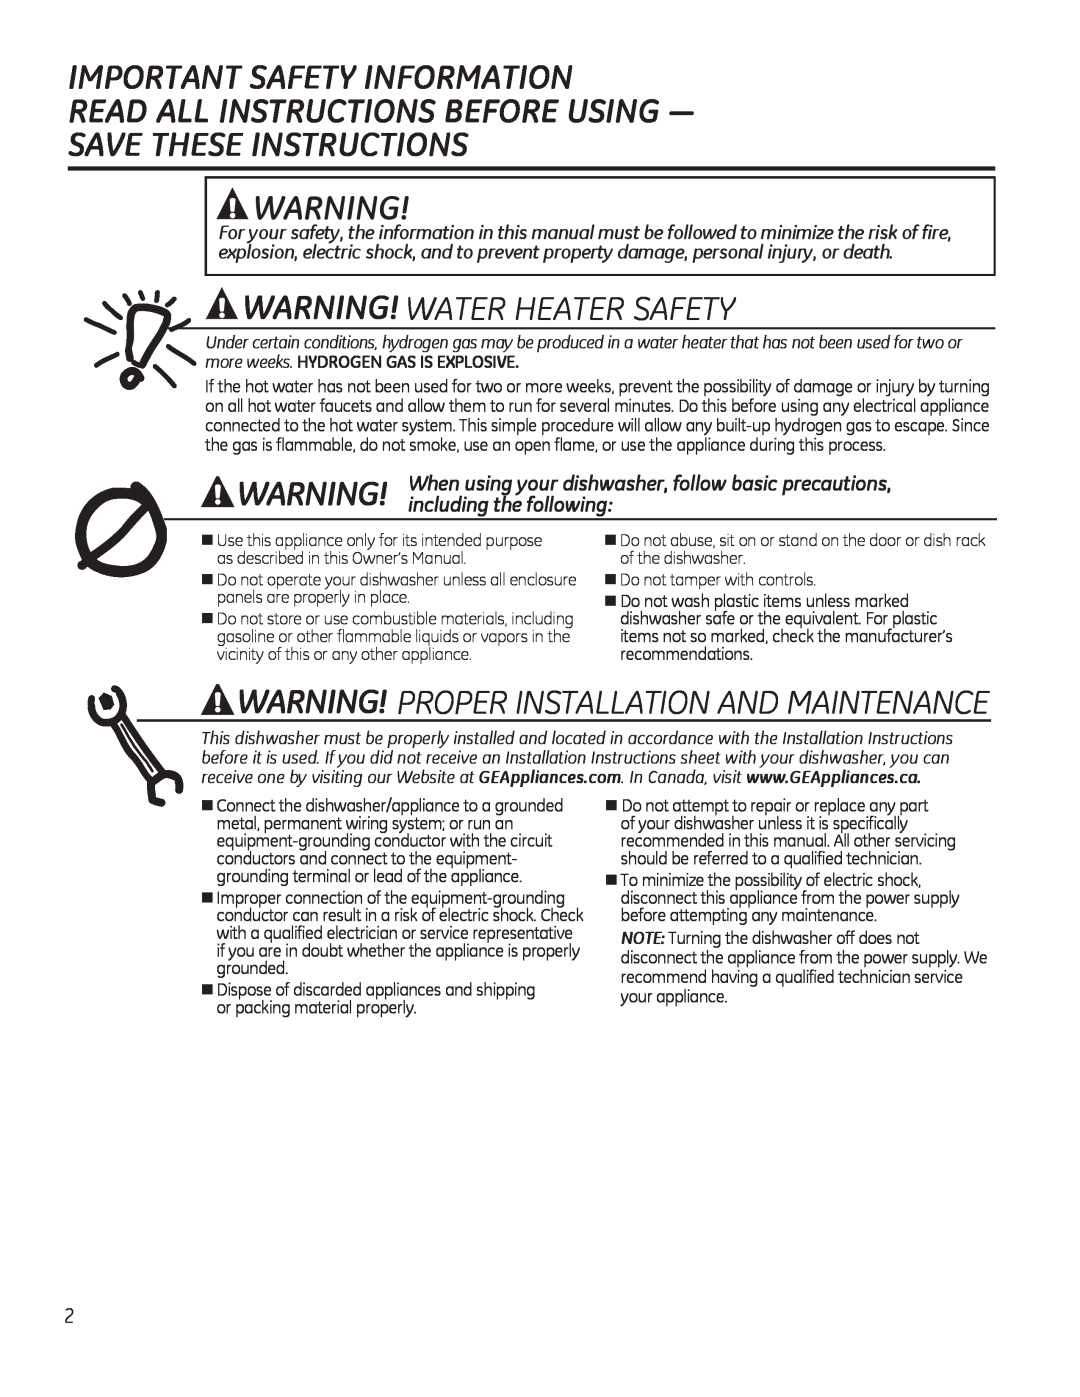 GE ADT520, Series GDF510-540 Important Safety Information, 5$$//,16758&7,216%2586,1*³, Save These Instructions 